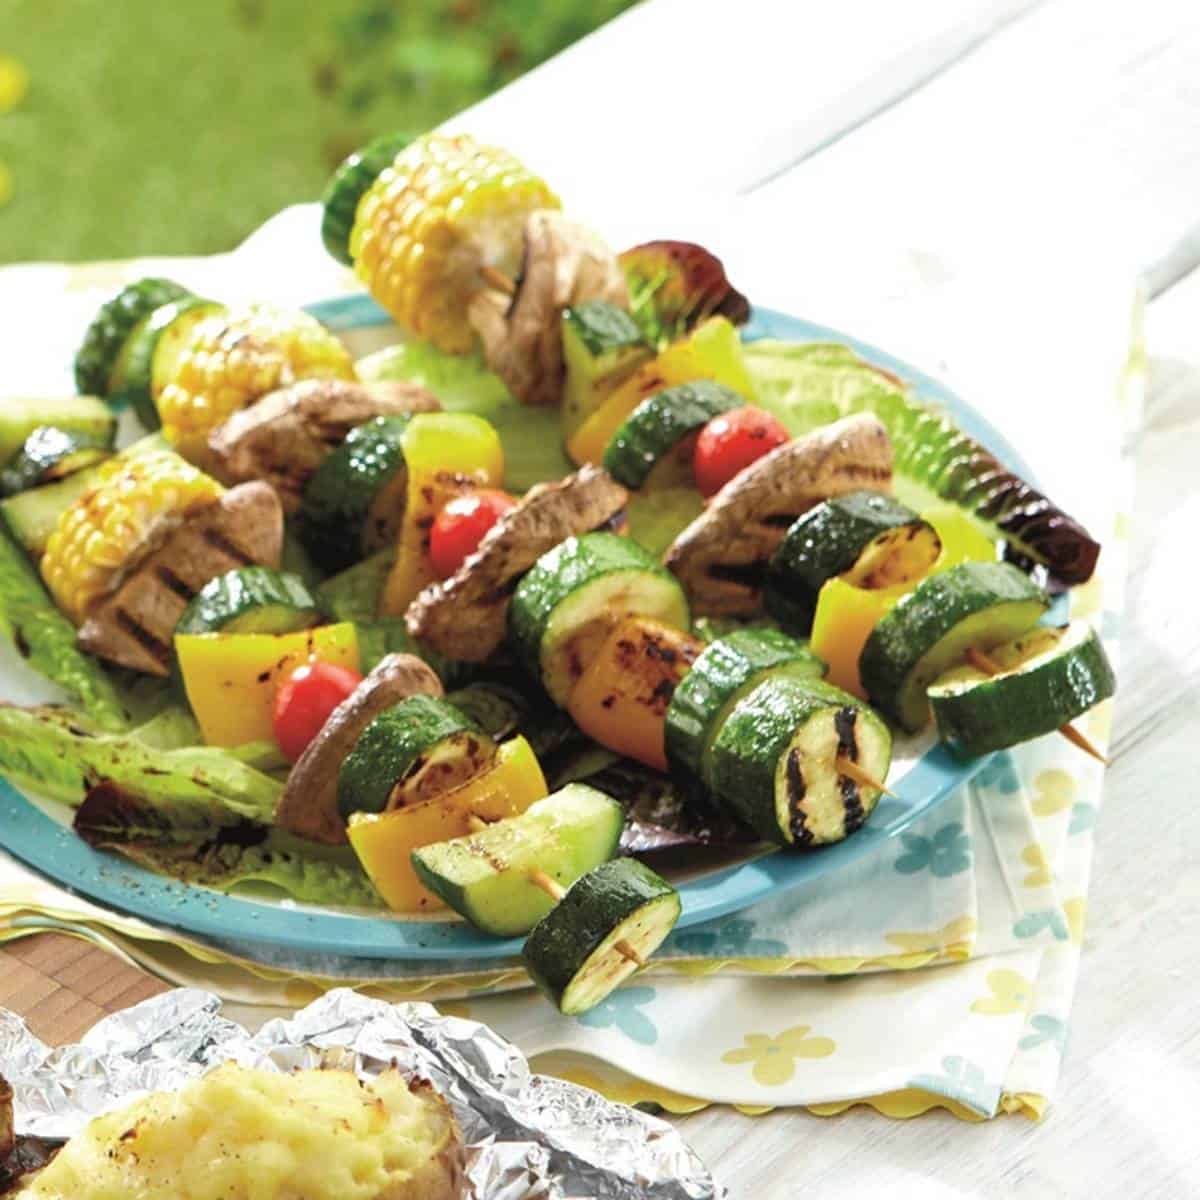 grilled vegetable skewers drizzled with balsalmic vinegar.